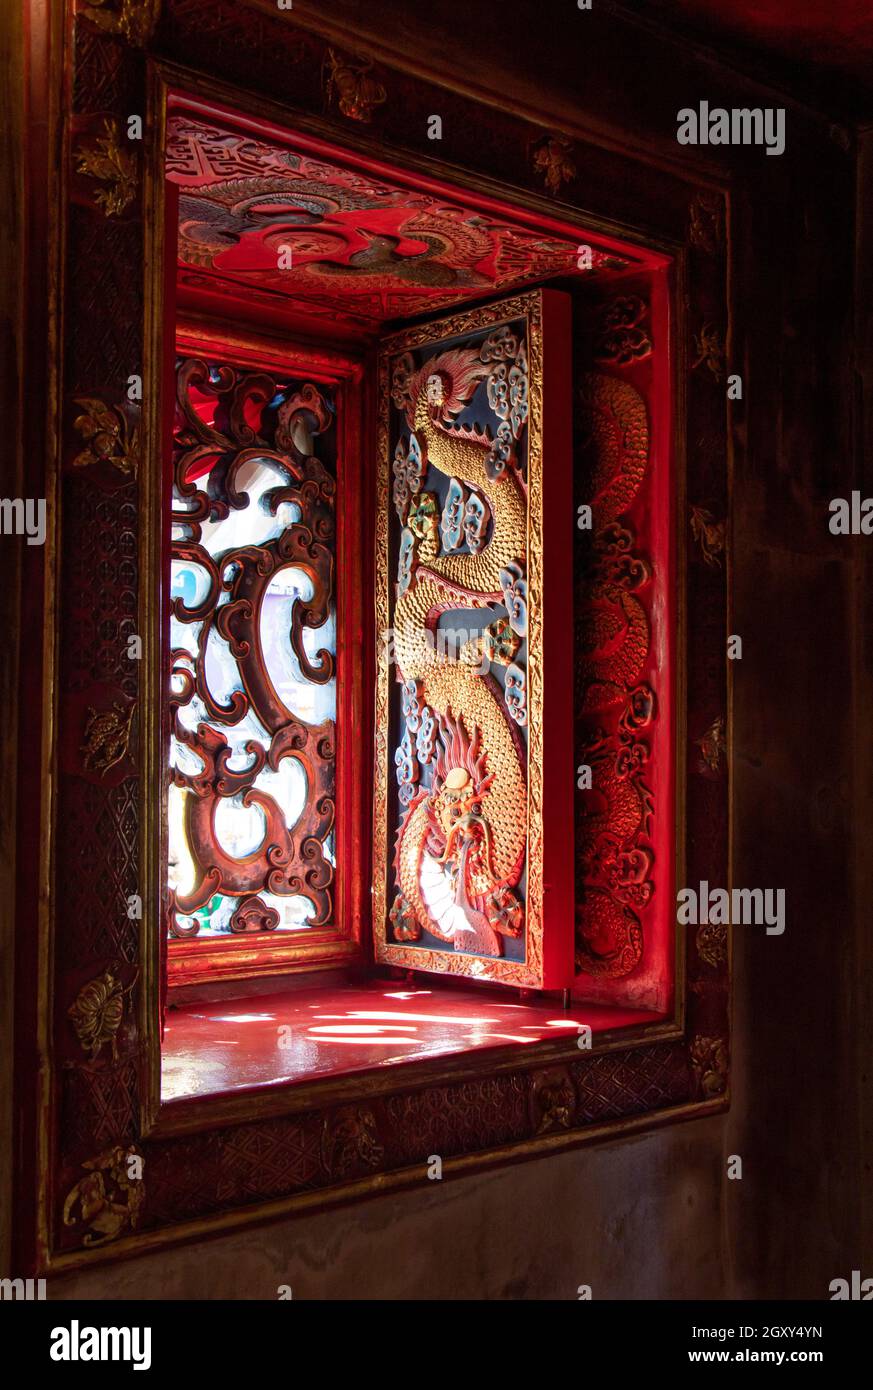 Carved shutters in an oriental temple. Richly decorated shutters with dragon theme, Chinese Buddhist monastery. Stock Photo